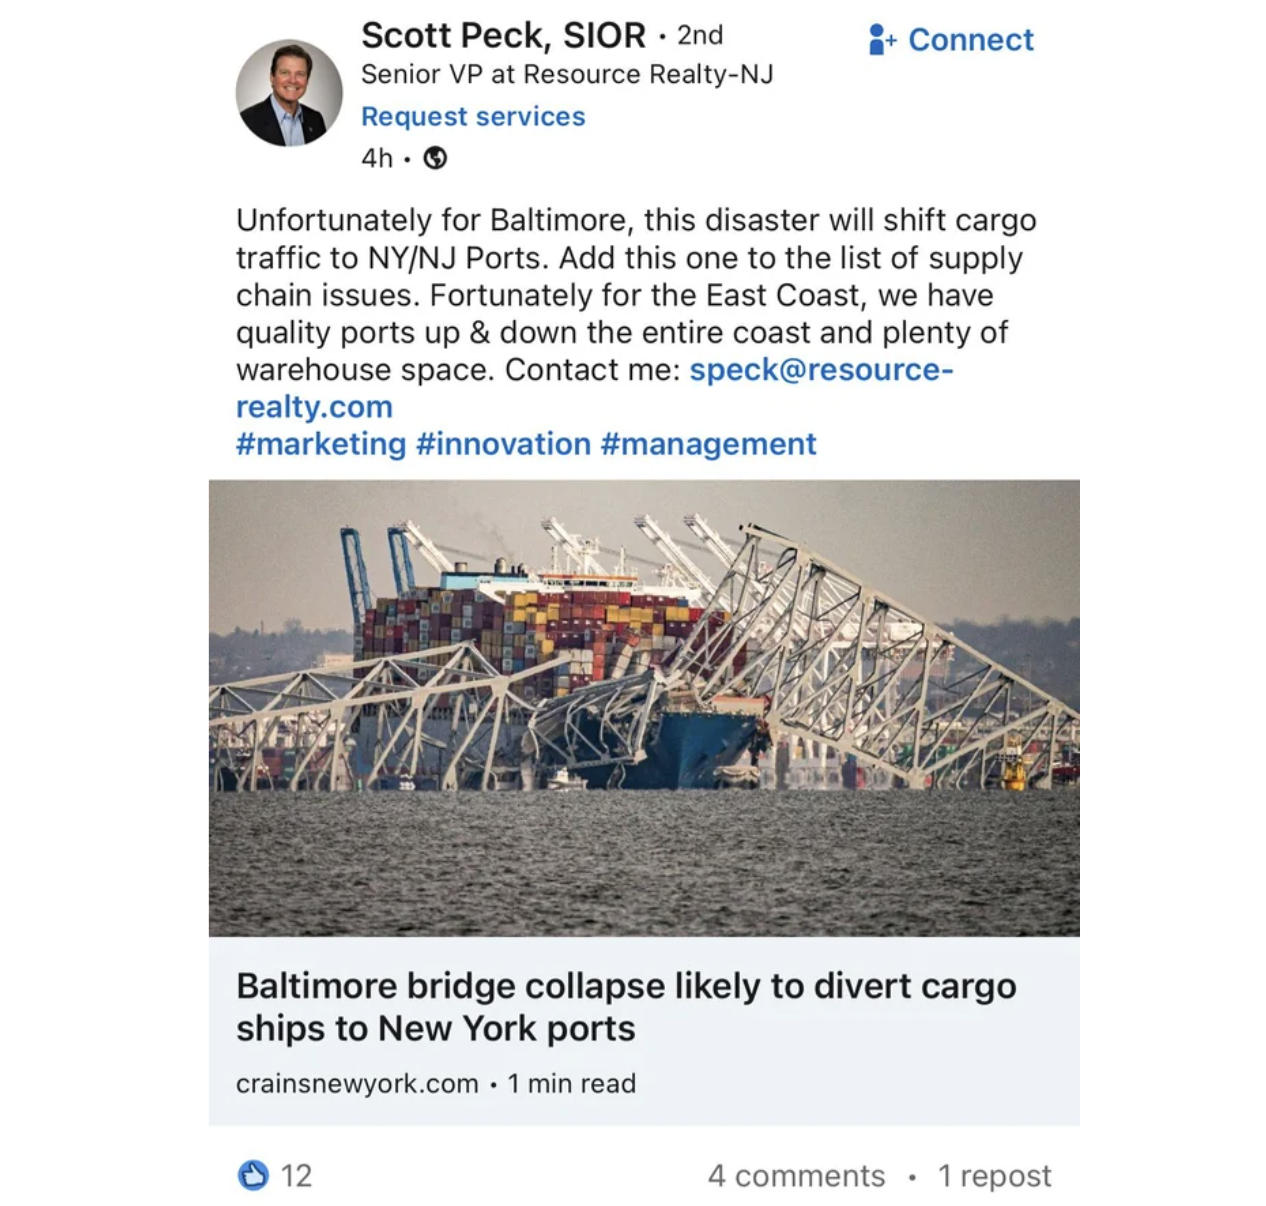 truss bridge - Scott Peck, Sior 2nd Senior Vp at Resource RealtyNj Request services 4h. Connect Unfortunately for Baltimore, this disaster will shift cargo traffic to NyNj Ports. Add this one to the list of supply chain issues. Fortunately for the East Co